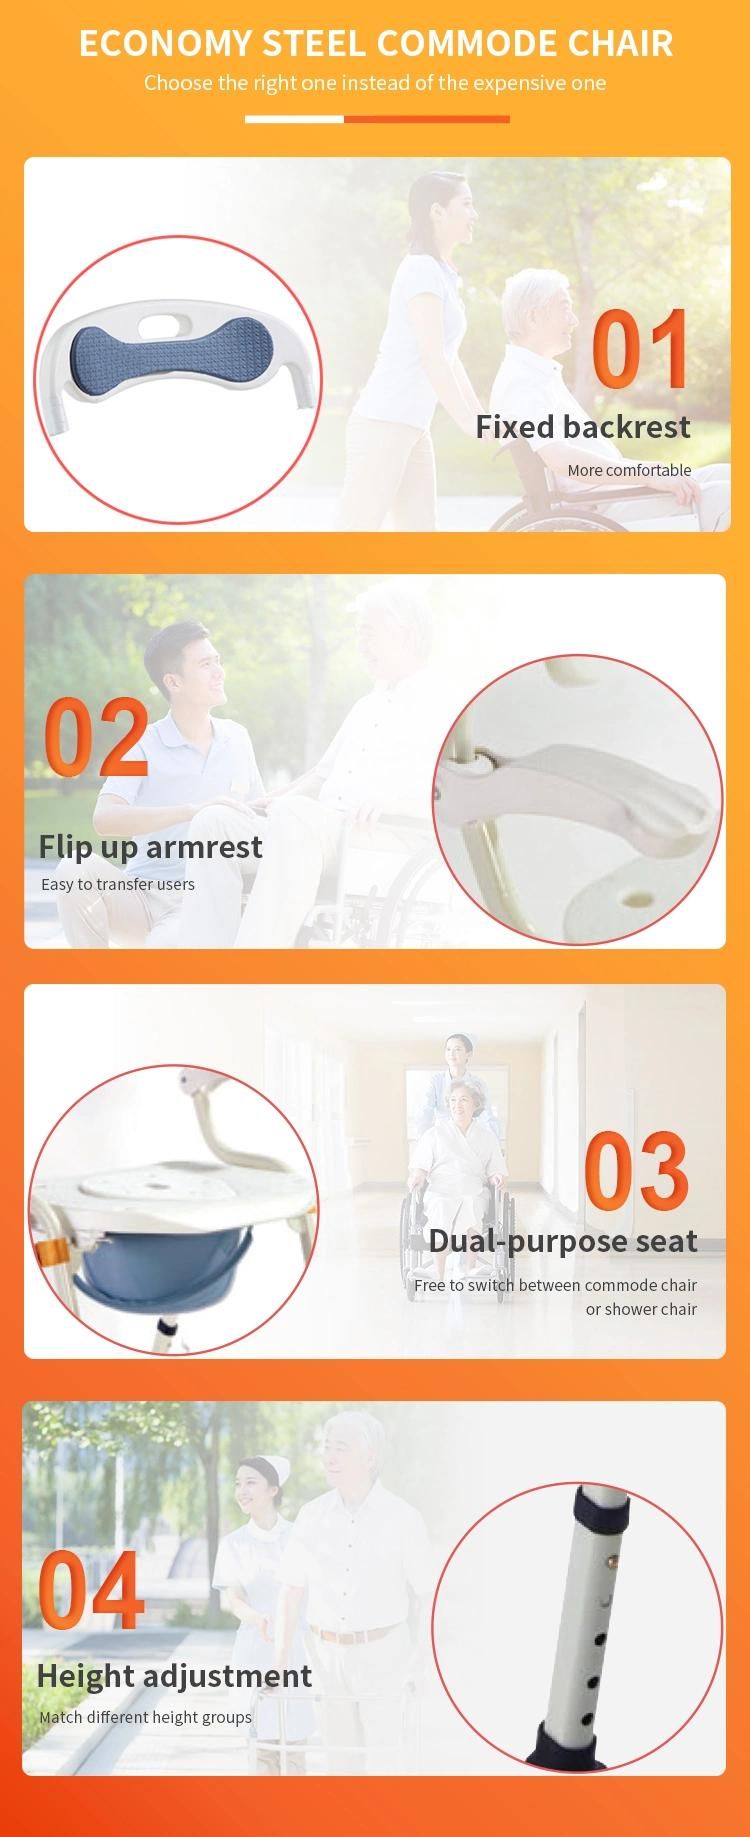 Fashion Hot Frame Shower Commode Chair Flip up Armrest Adjustable Height Non-Slip Foot Pad as Toilet Seat Frame Shower Chair Have EVA Cushion Got CE FDA